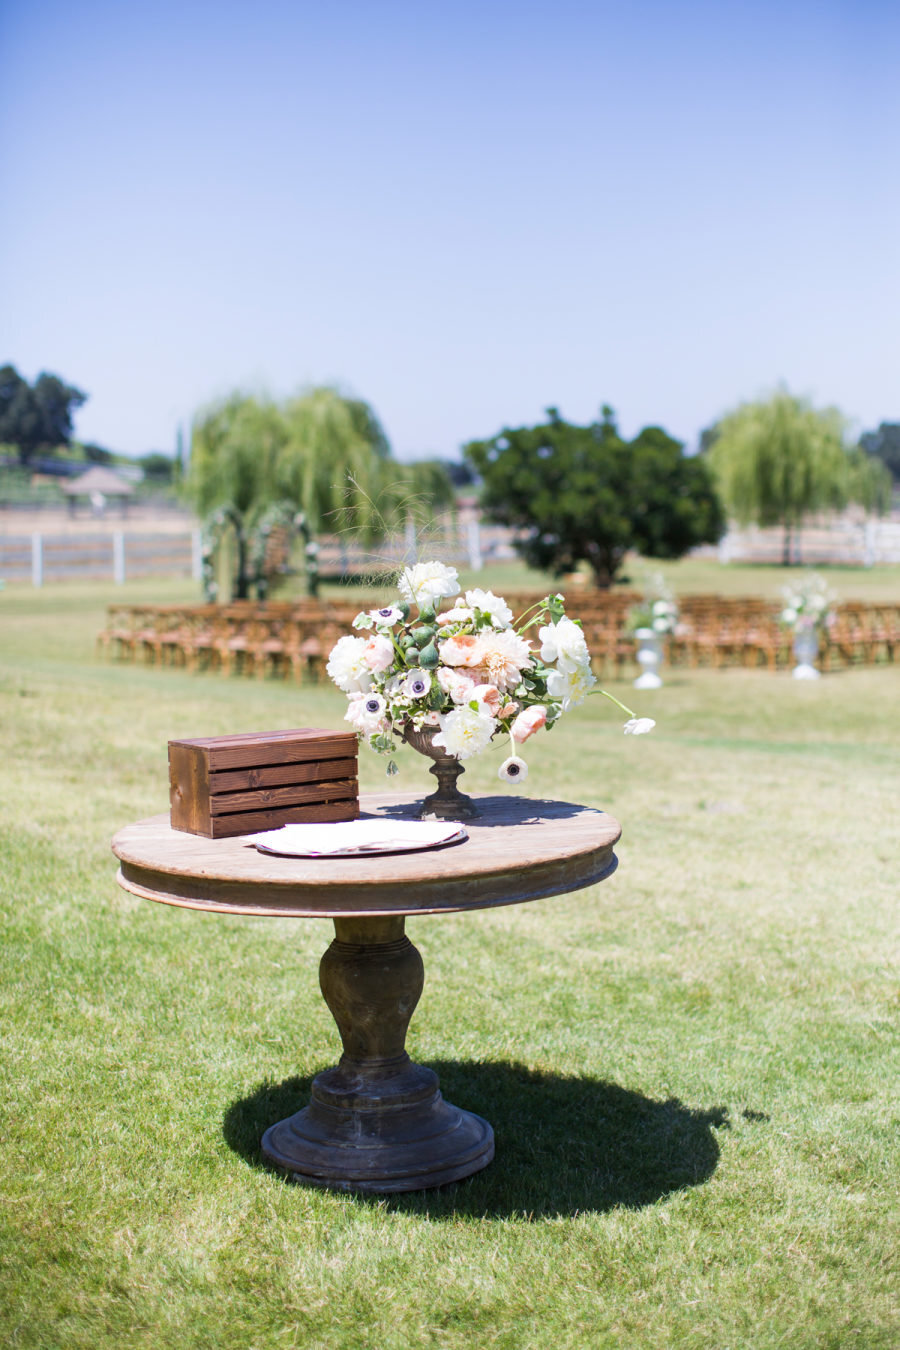 rustic wood table and flowers for wedding programs